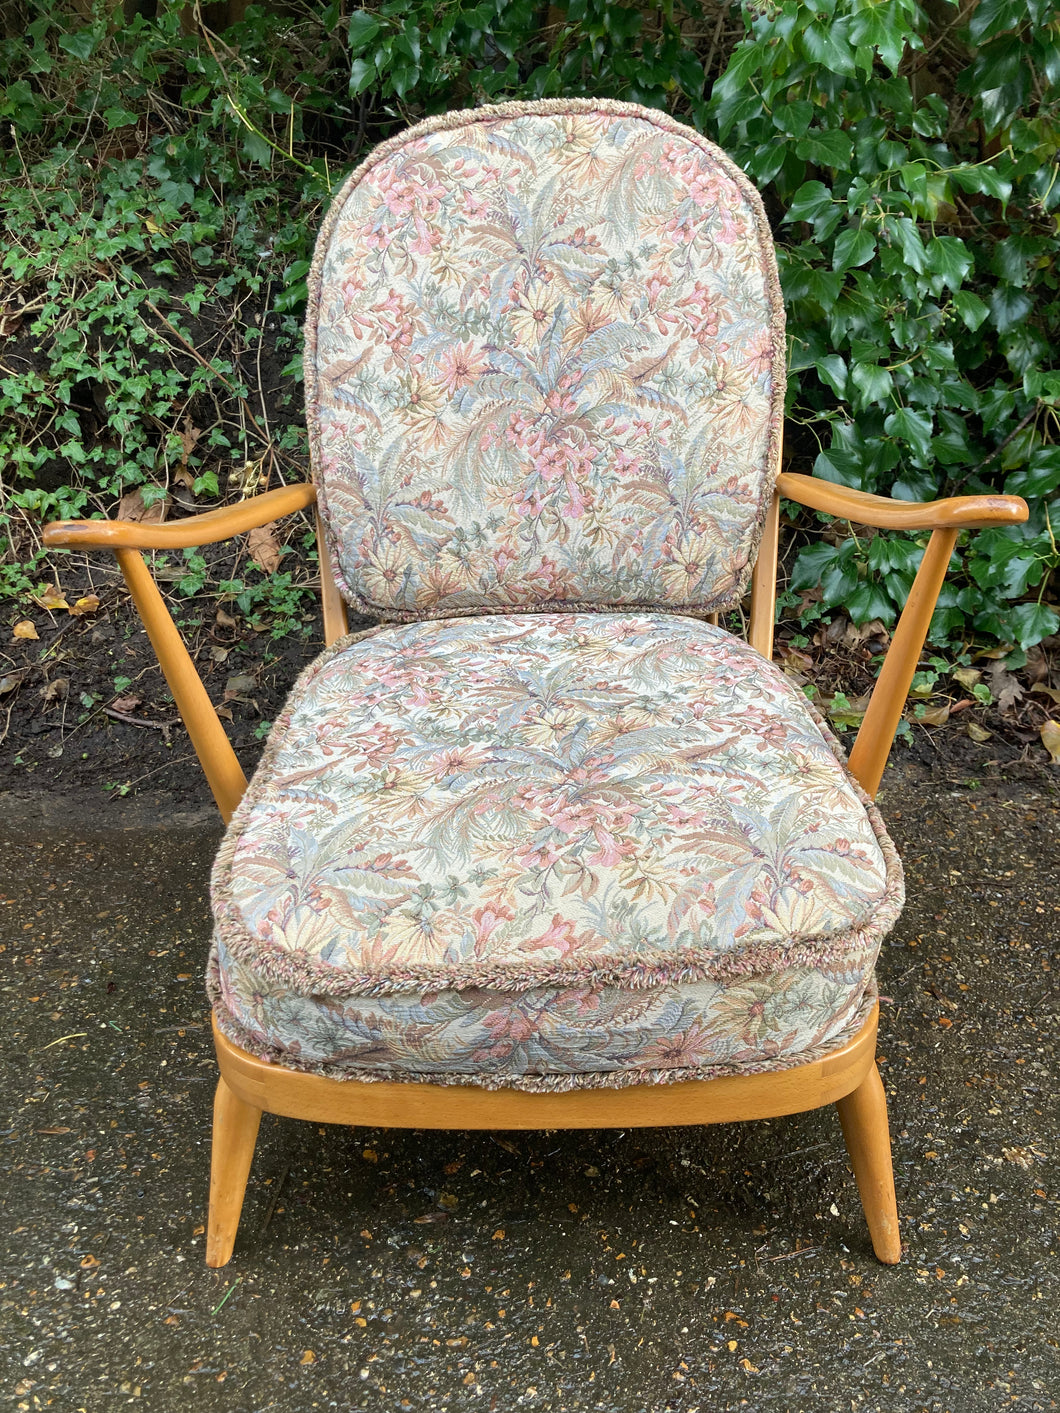 Retro Mid Century Blonde Ercol Armchair In Need Of New Webbing